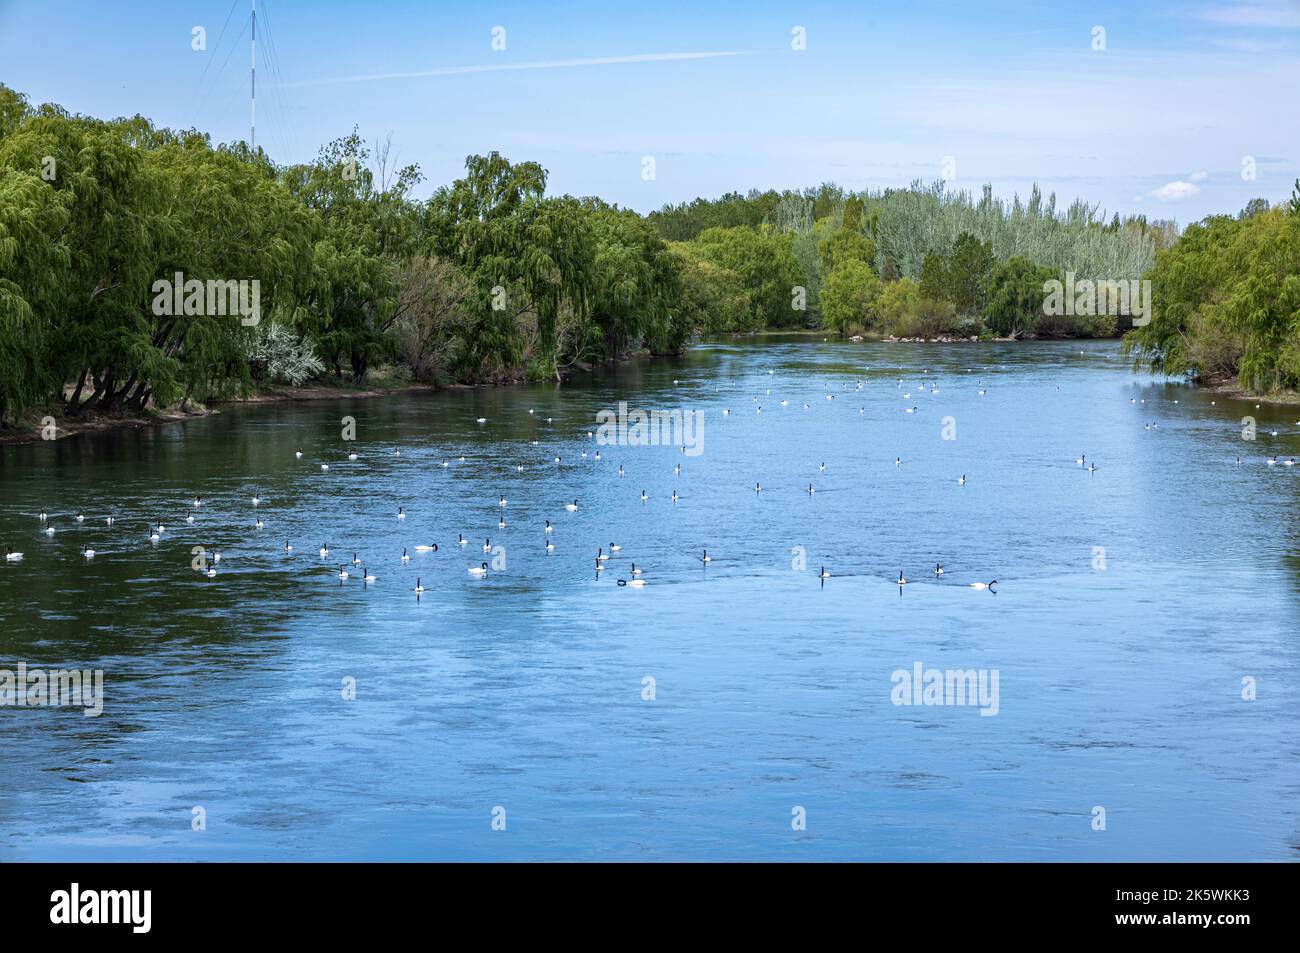 Numerous birds in the river swimming against the current. Landscape of the province of Neuquen in Argentina. Stock Photo